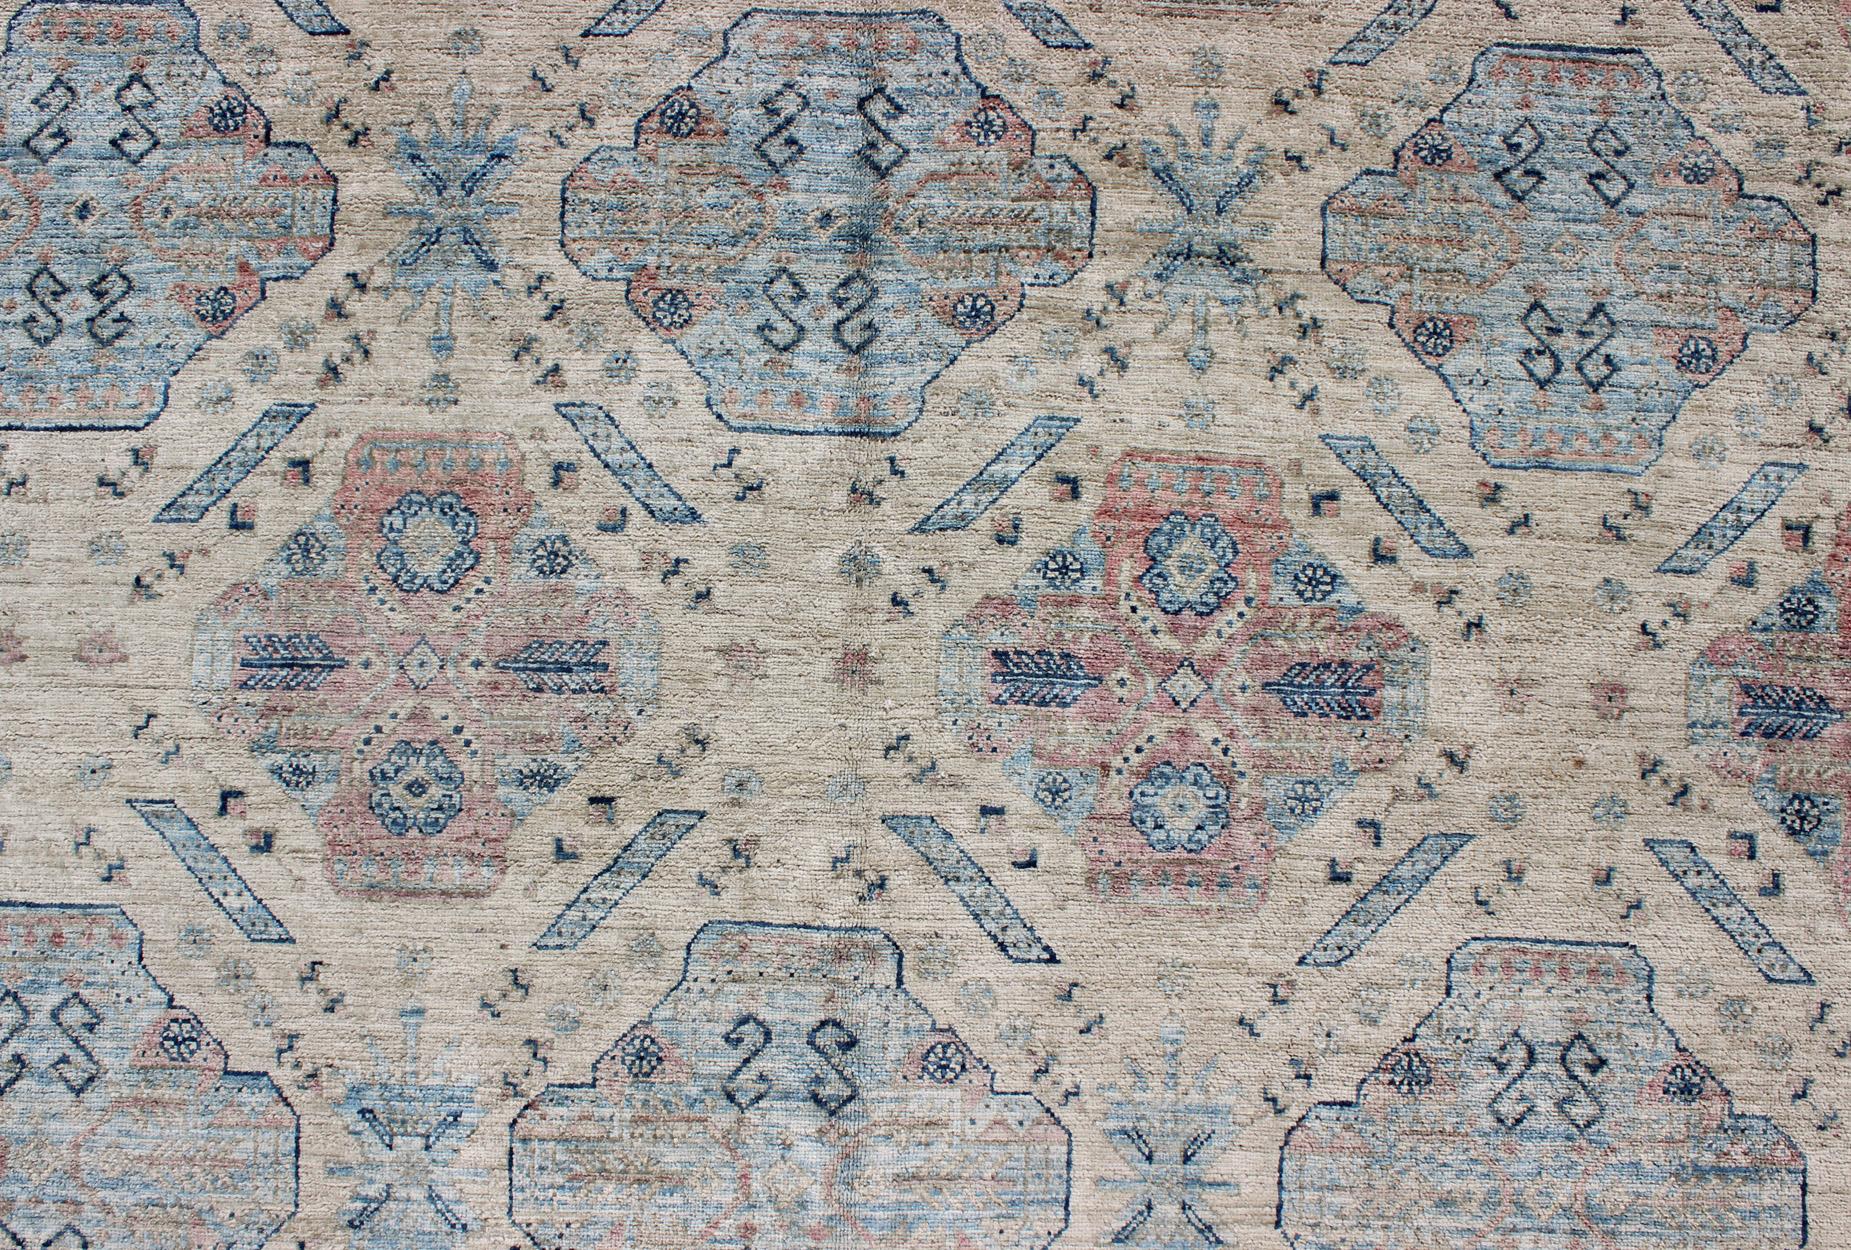 Light Khotan rug with geometric Medallions, rug KOL-67784 country of origin / type: Afghanistan / Khotan

This Khotan features a geometric all-over design flanked by a repeating pattern in the border. The entirety of the piece is rendered in light